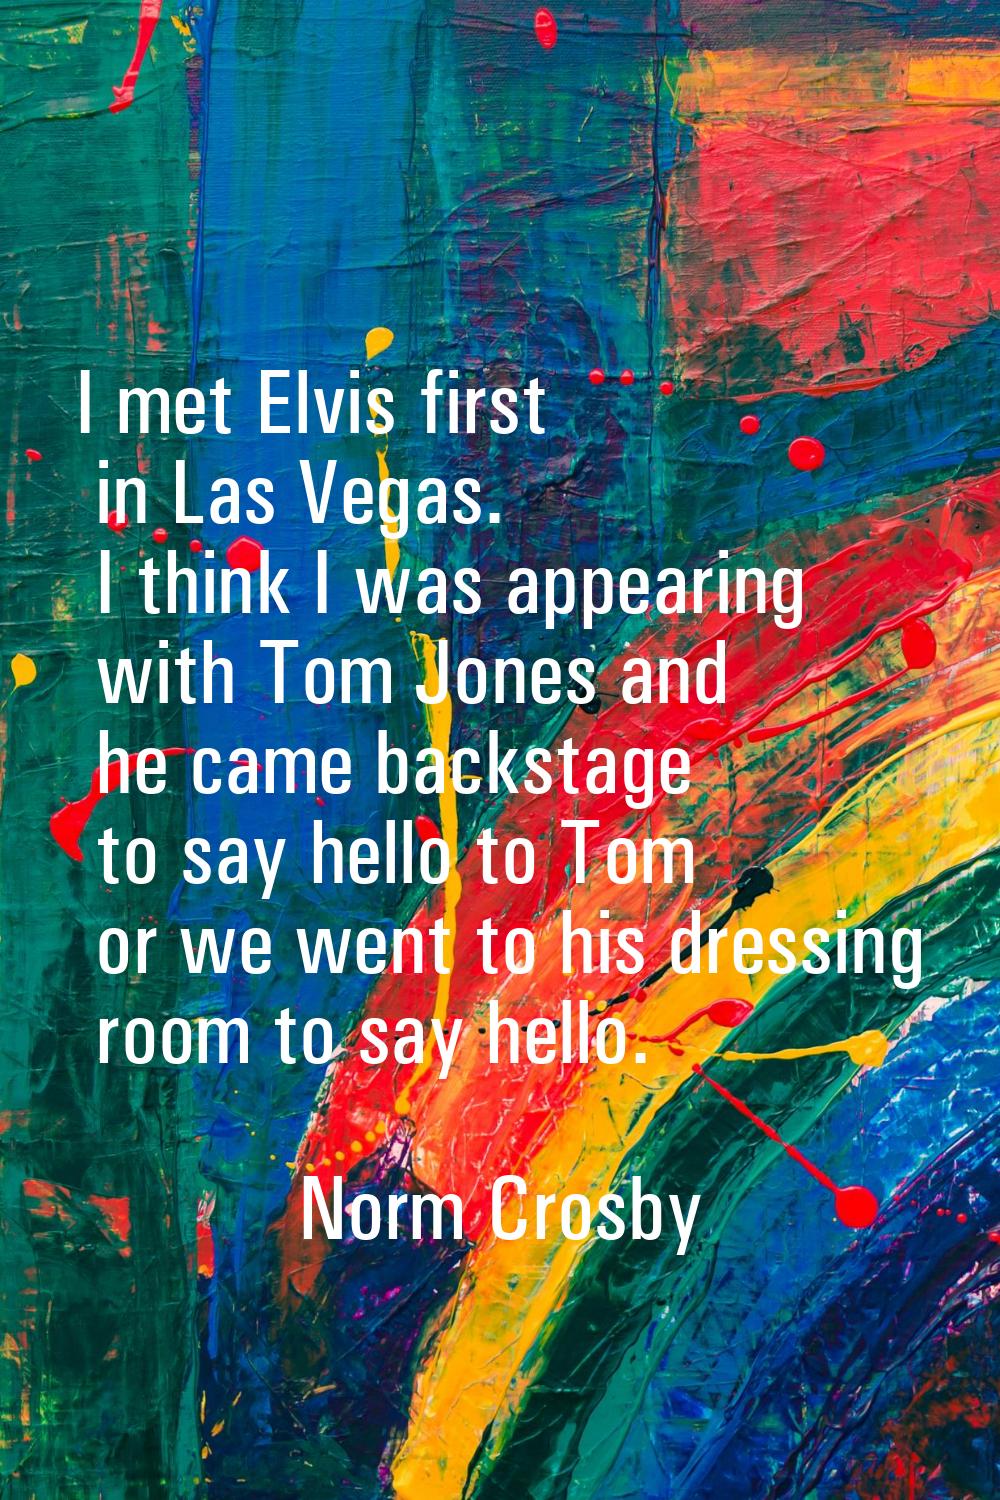 I met Elvis first in Las Vegas. I think I was appearing with Tom Jones and he came backstage to say